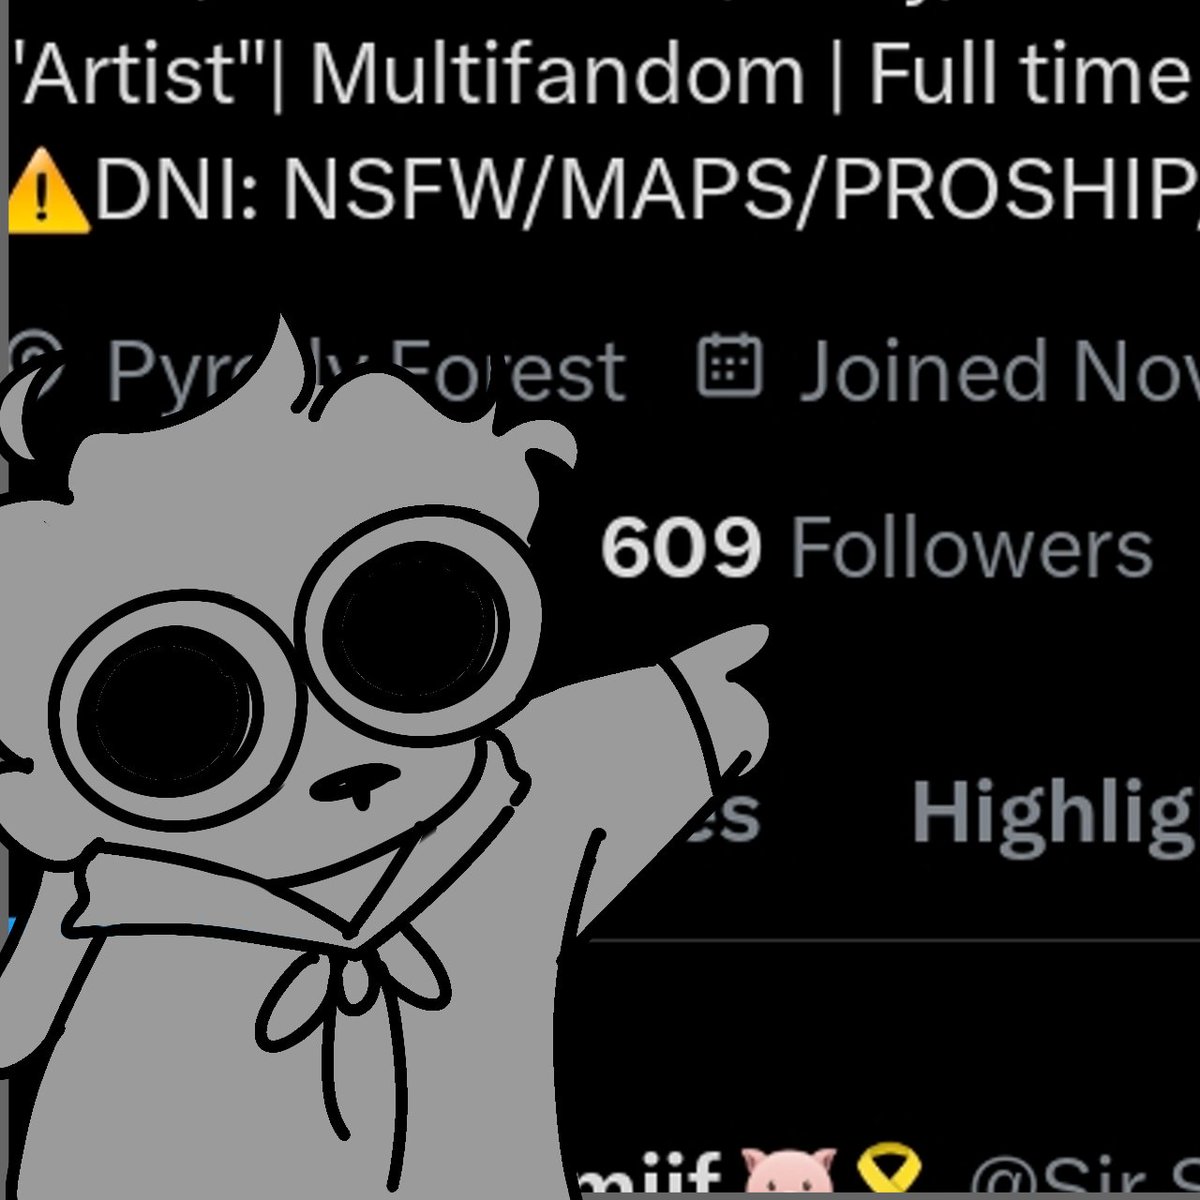 Ignore my last tweet (?), THANK YOU SO MUCH FOR 600 FOLLOWERS, YIPPEE!!!! :DDD